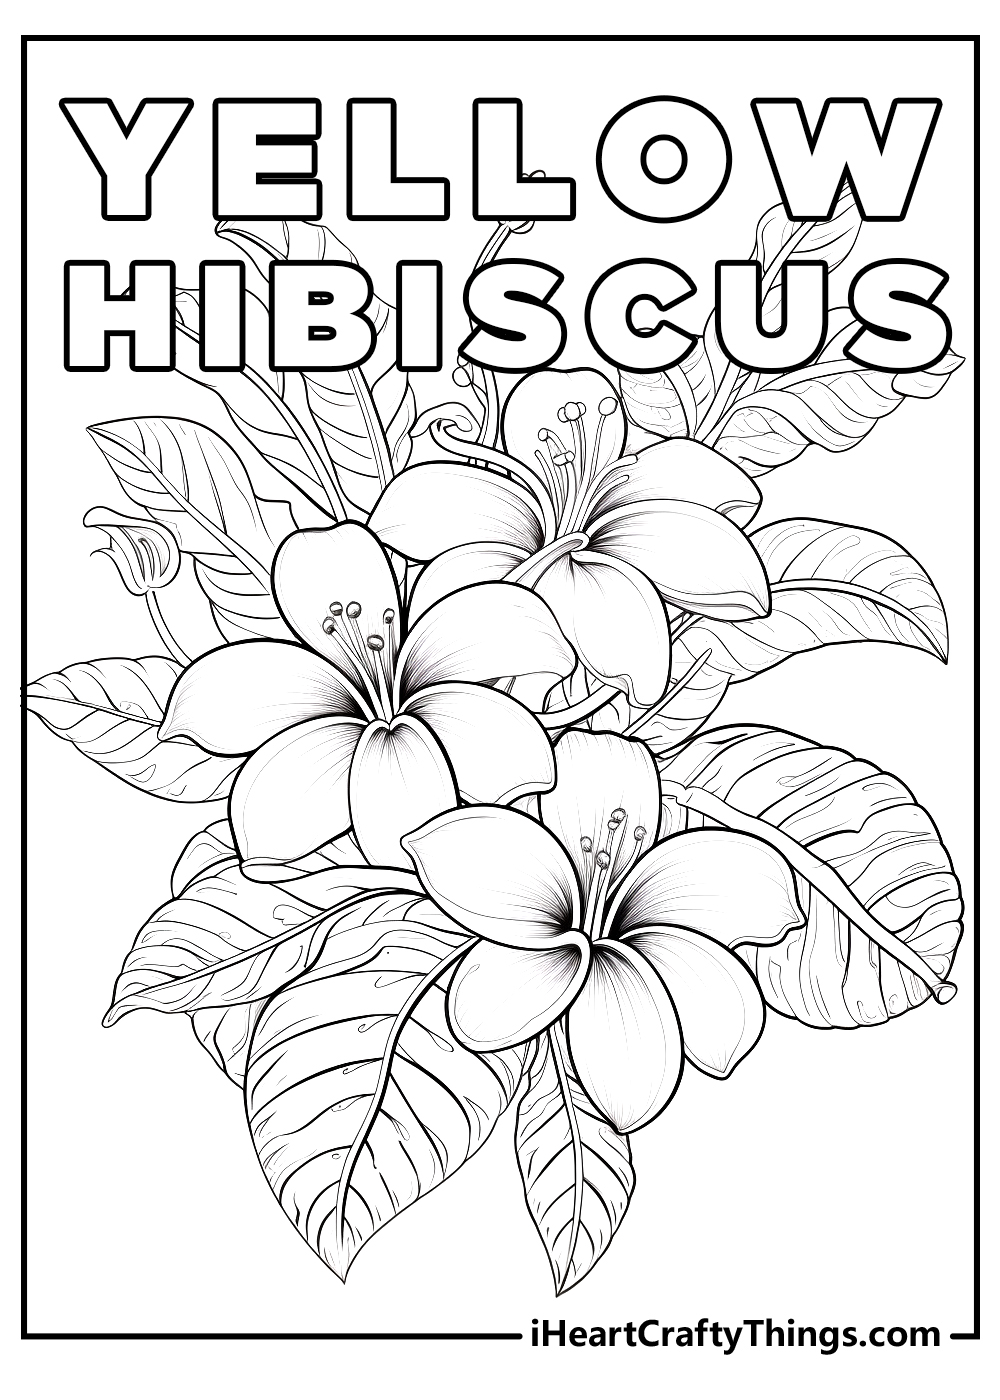 yellow hibiscus hawaii coloring pages